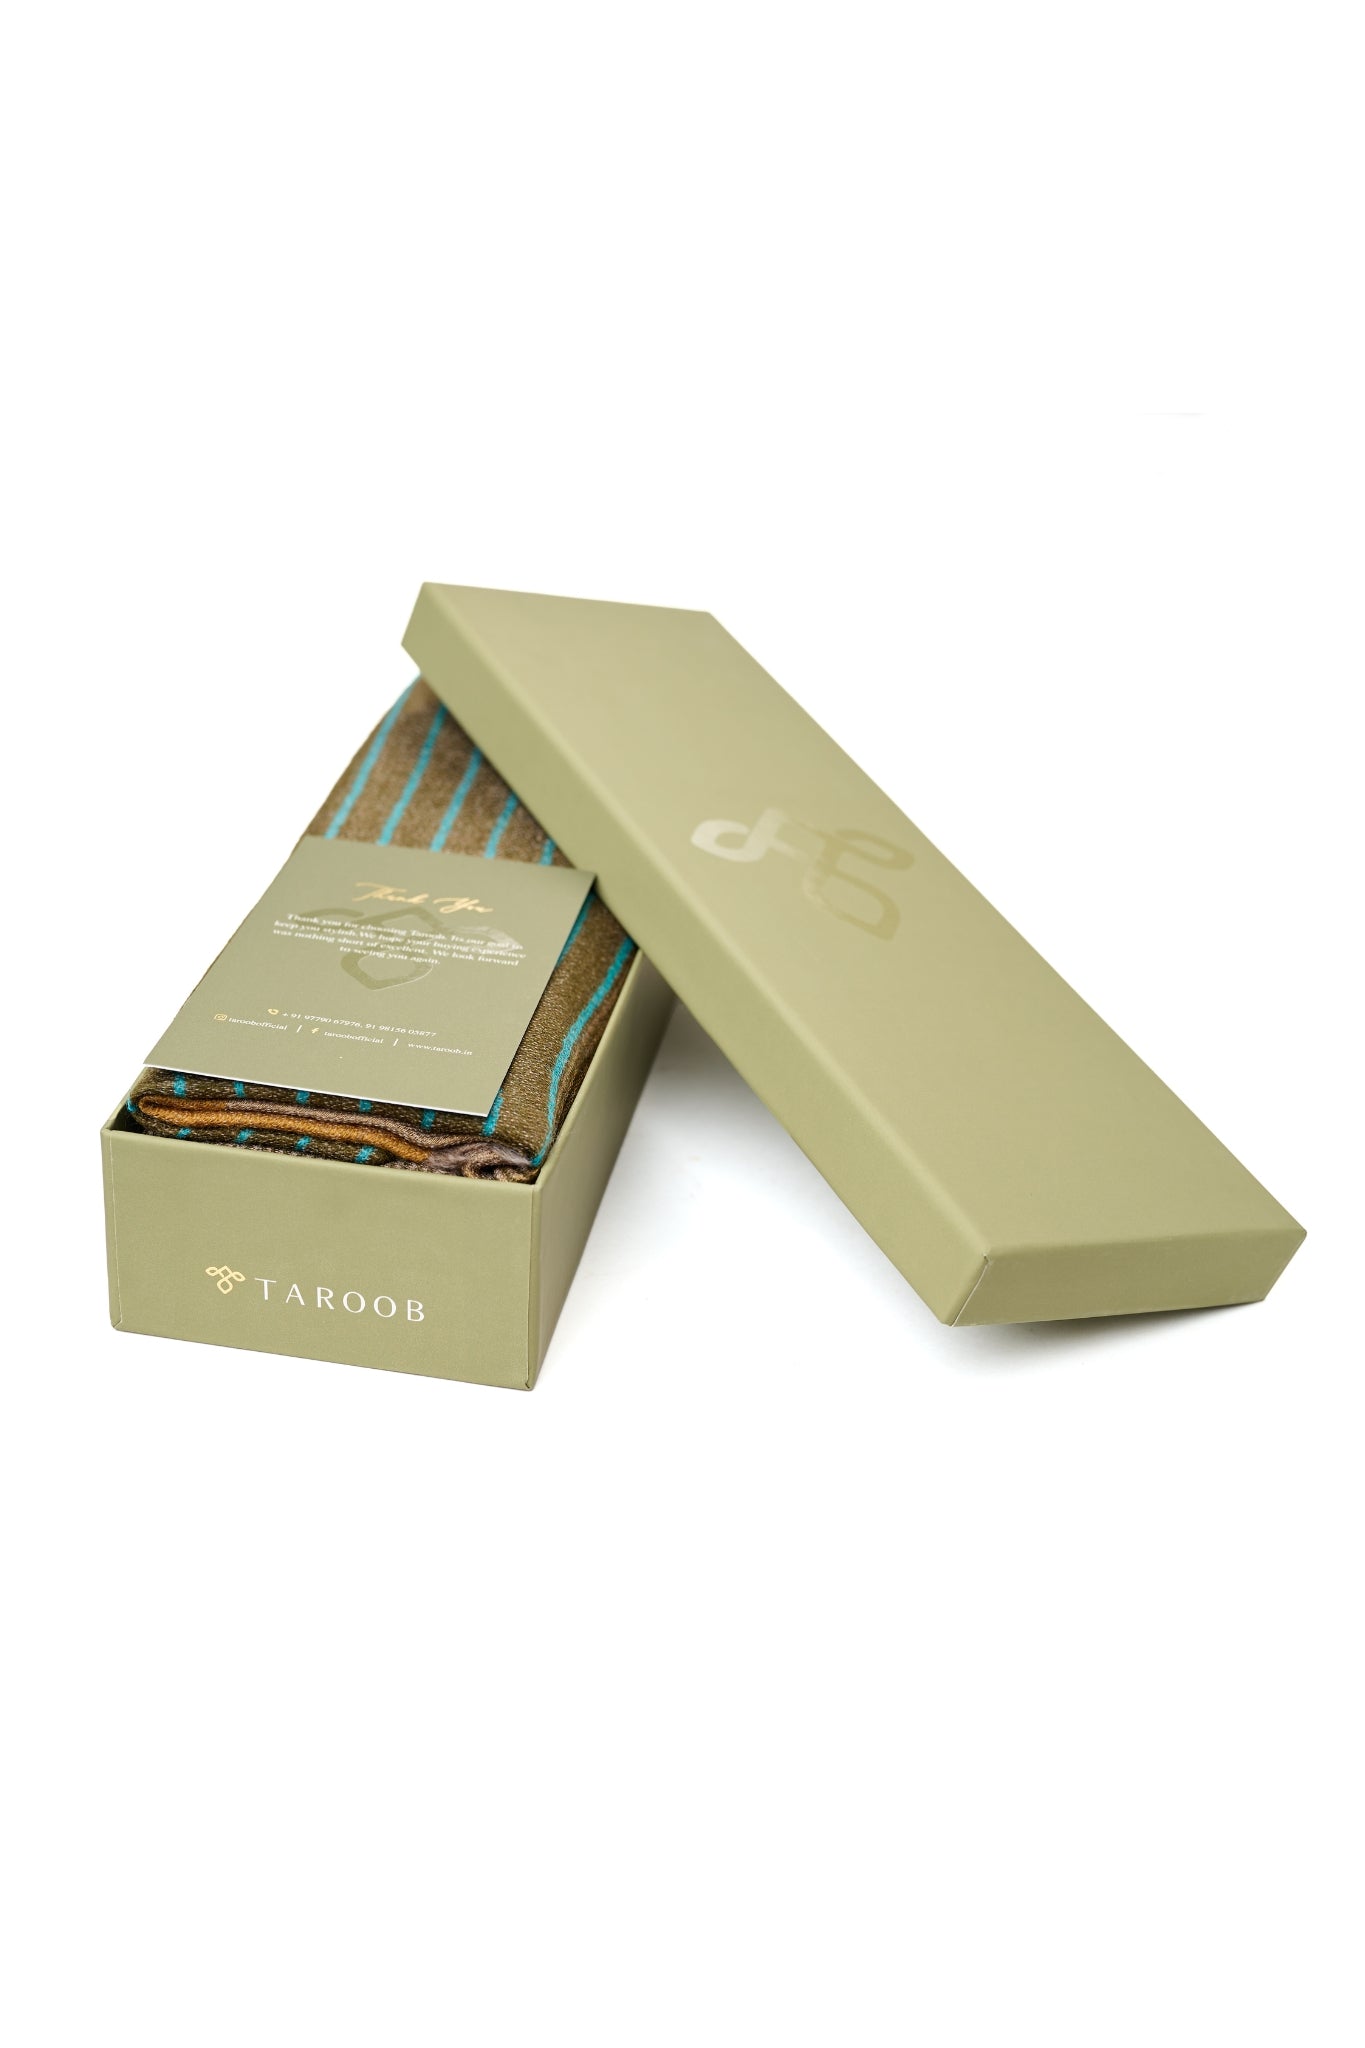 Shop Patchi Branded Chocolate Gifts Boxes Online in Canada | Patchi Luxury  Chocolate